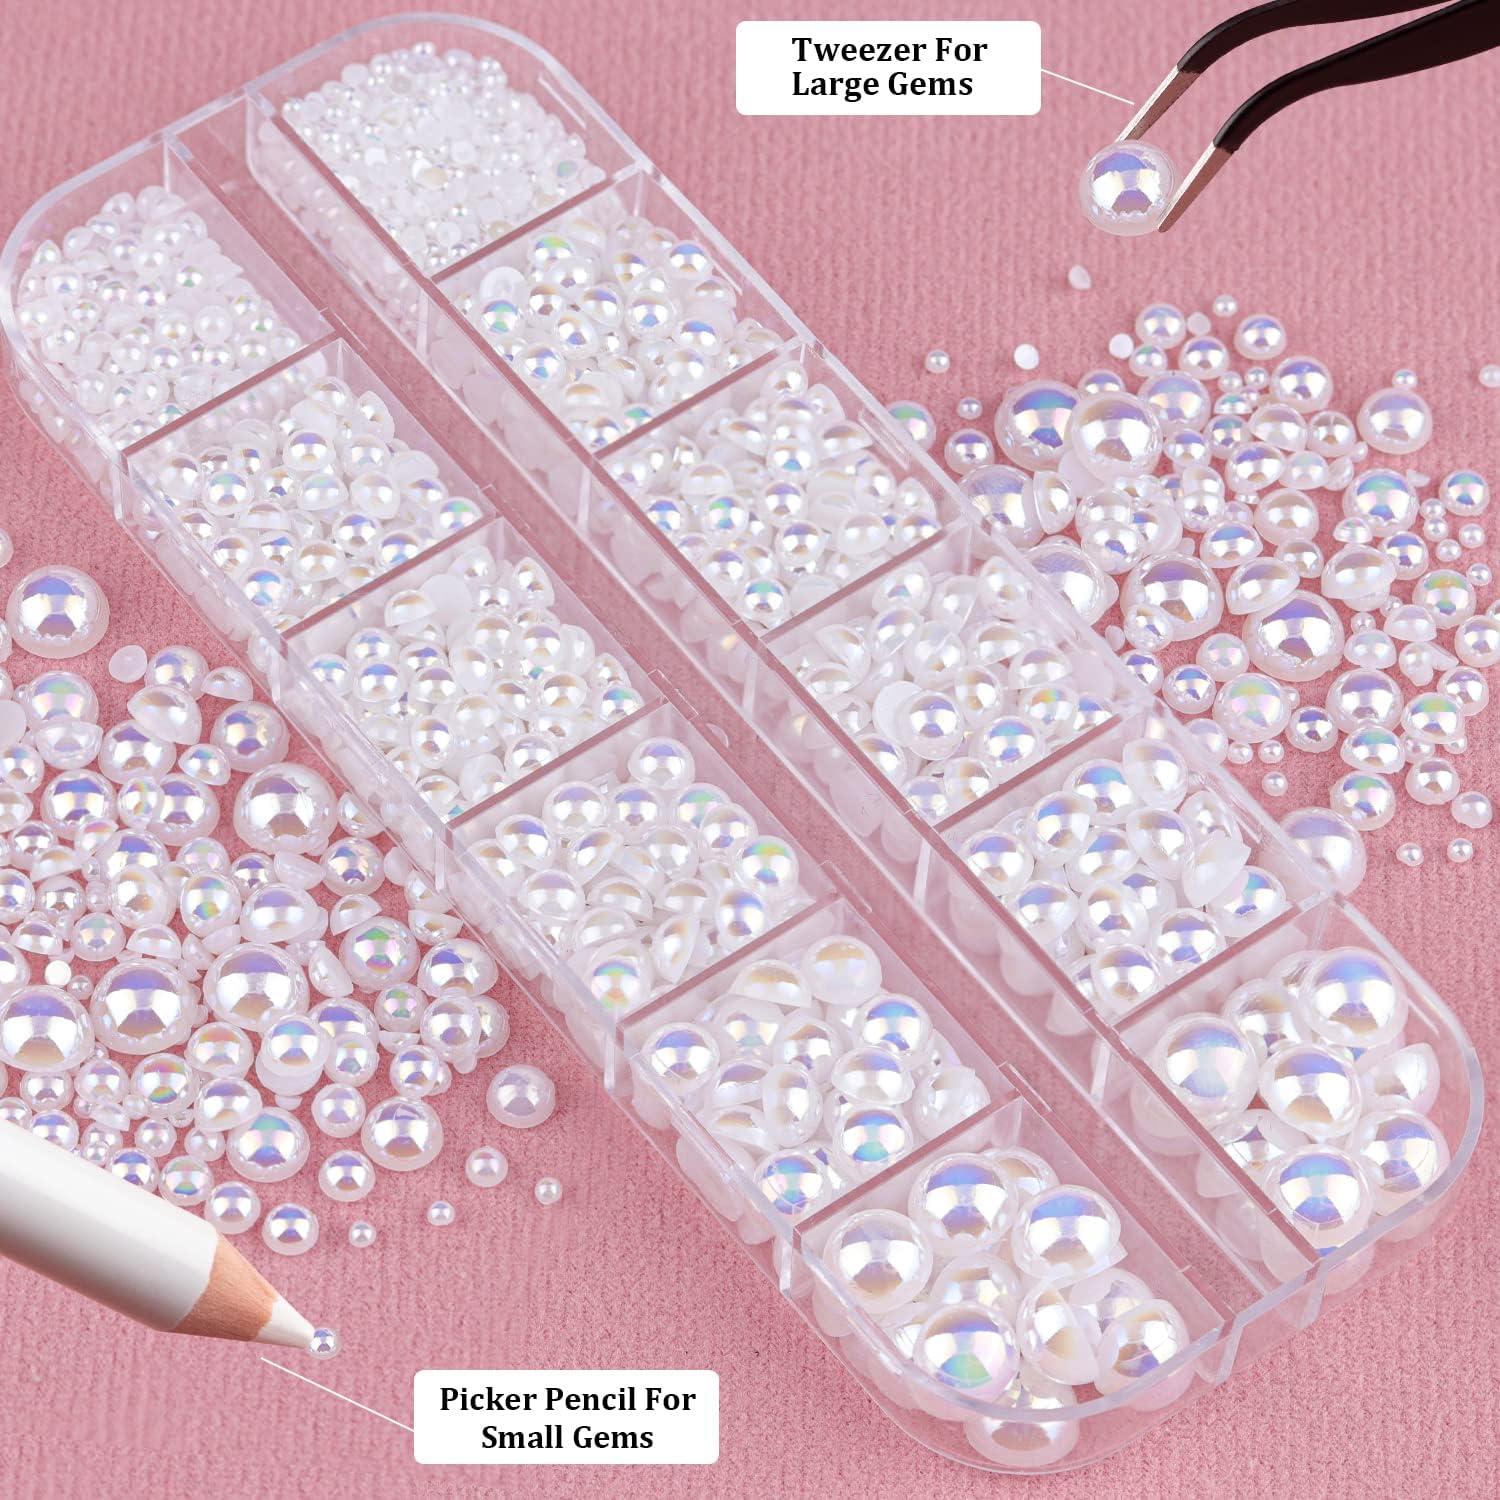 2700 Pcs Flat Back Pearls Kits 1 Box of Flatback White+1 Box of Beige Half  Round Pearls with Pickup Pencil And Tweezer for Home DIY And Professional  Nail Art, Face Makeup And